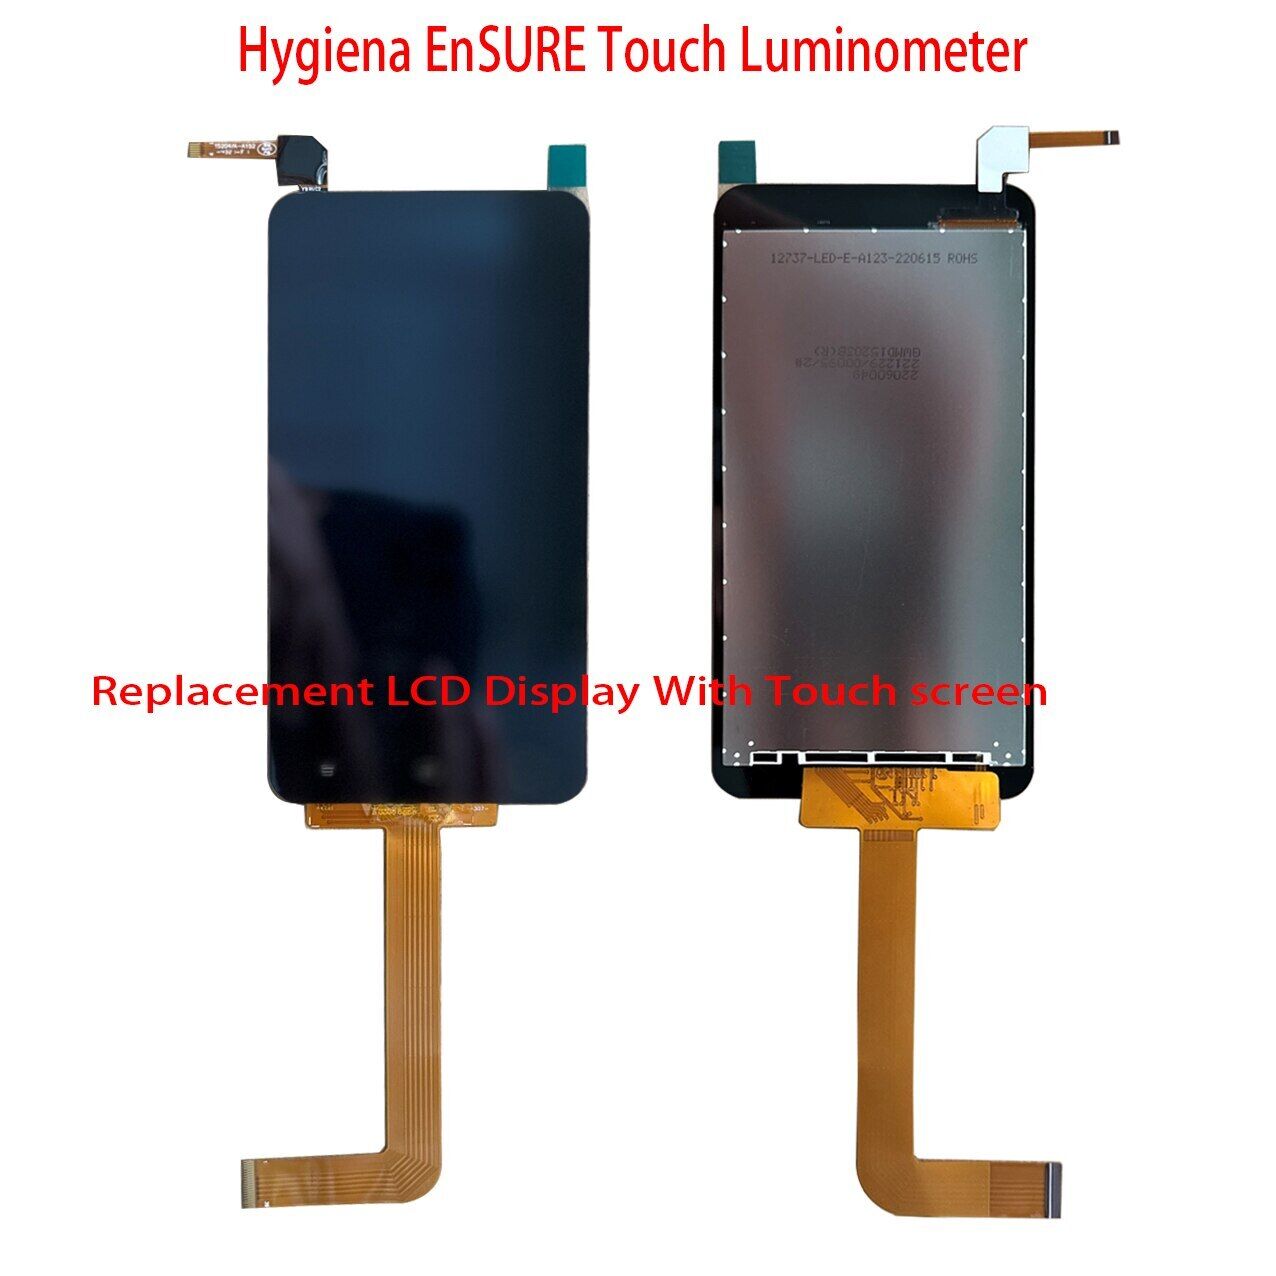 Replacement Lcd For Hygiena EnSURE Touch Luminometer LCD Display Touch Screen